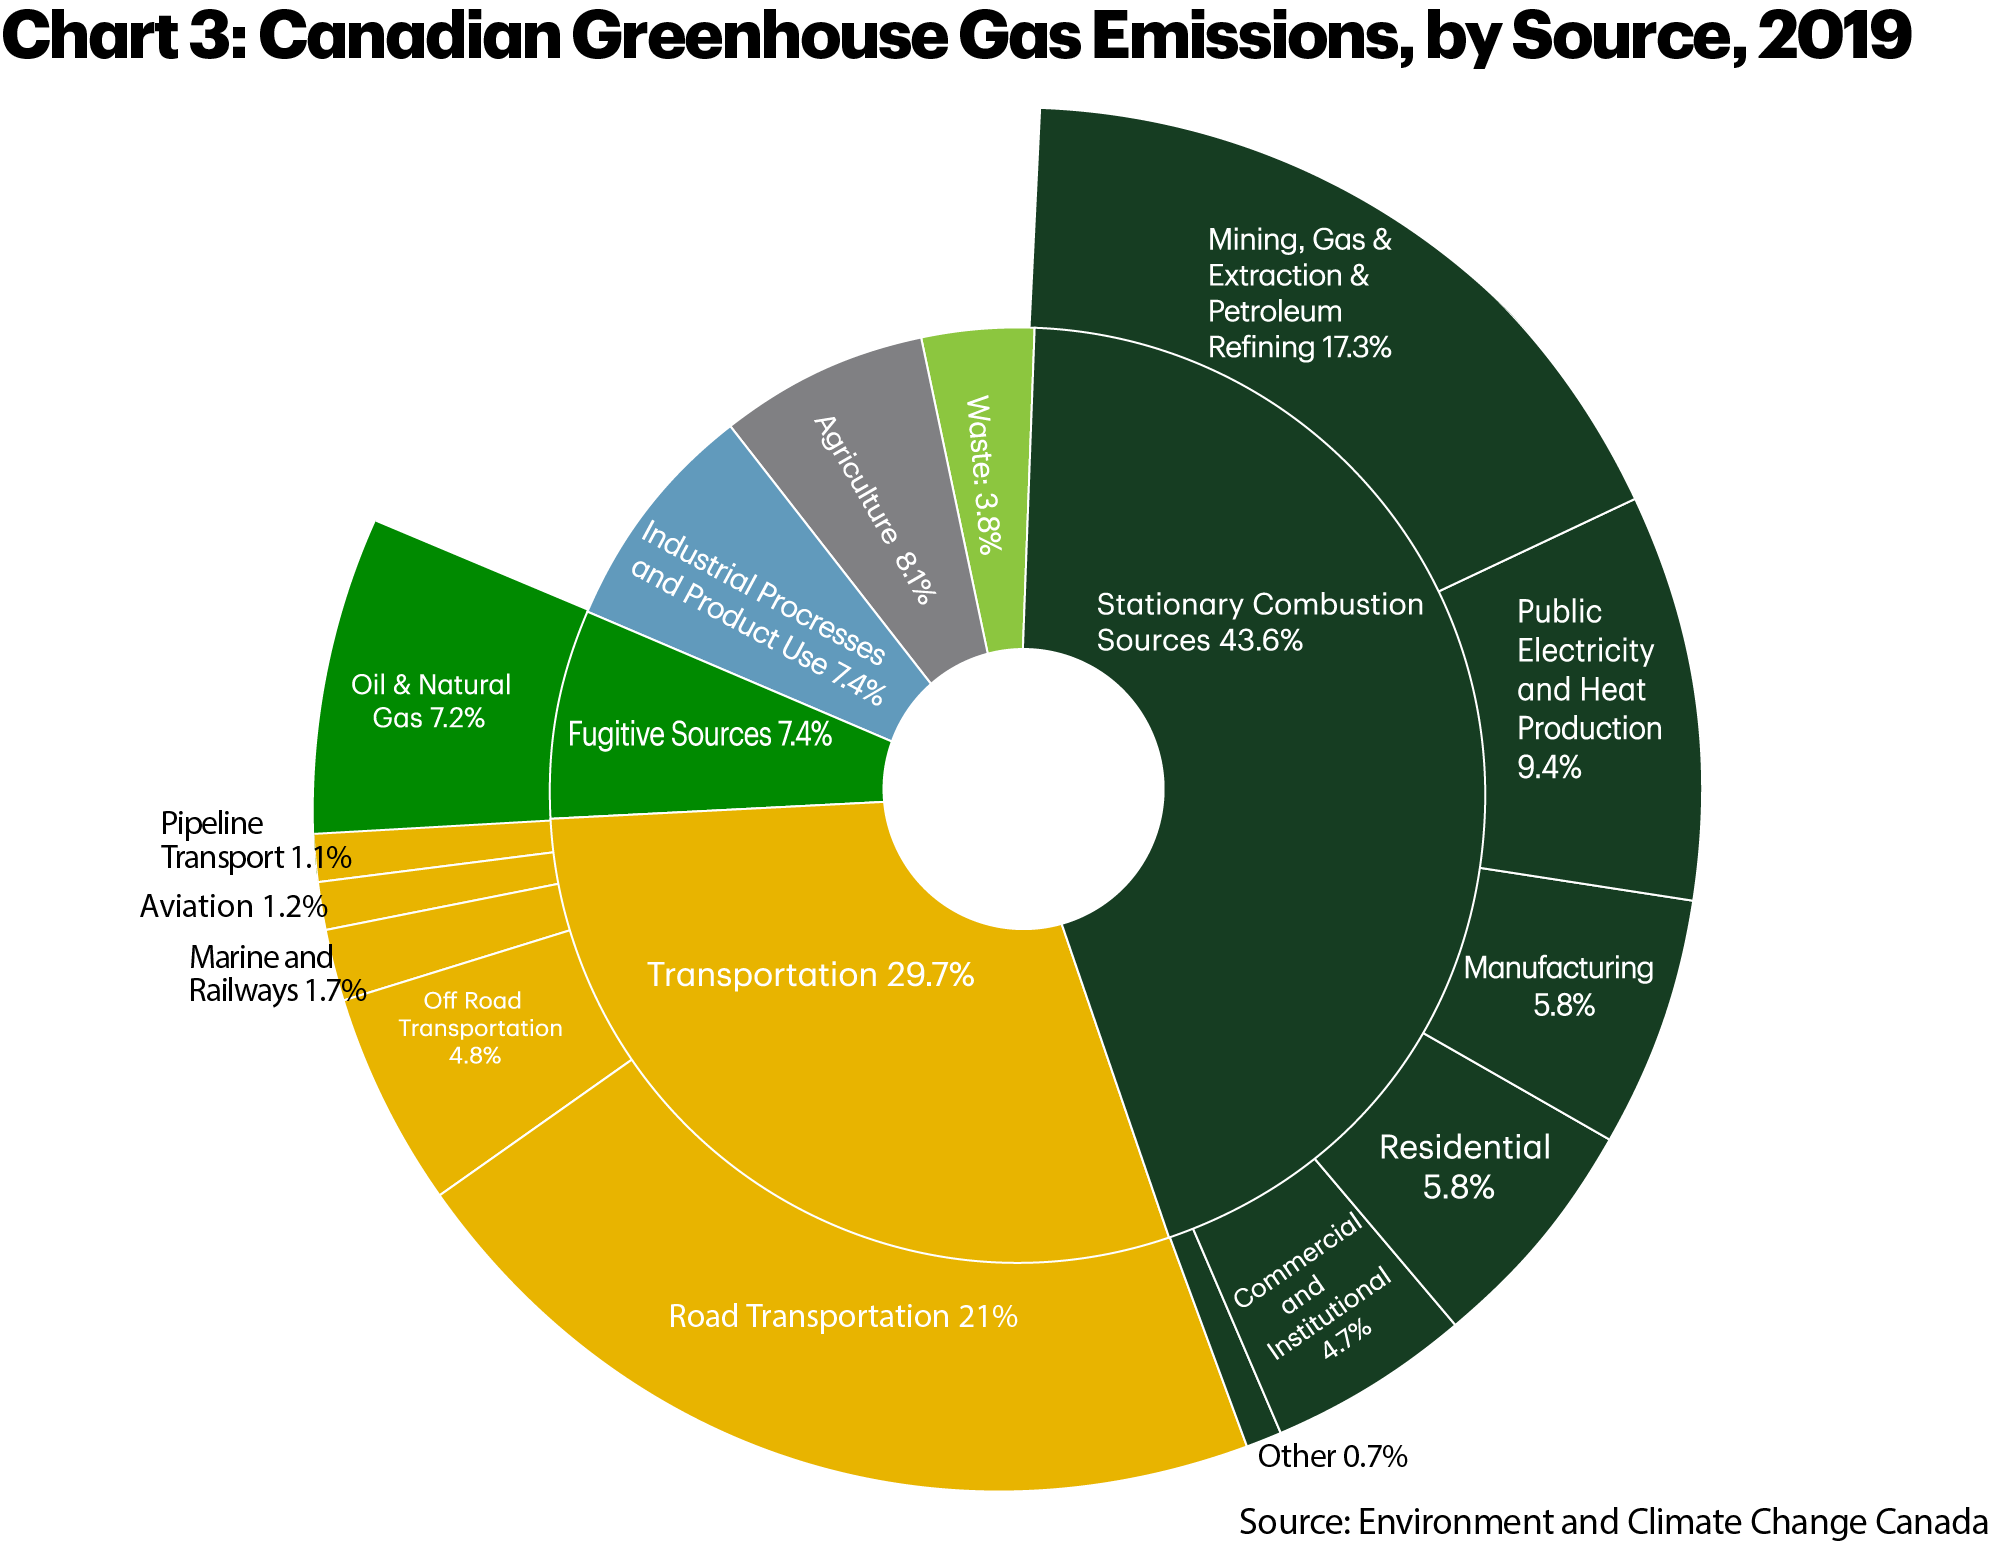 : Chart 3 shows the breakdown of Canadian greenhouse gas emissions in 2019. Stationary combustion sources emit the highest level, representing 43.6% of total emissions, followed by the transportation sector, which represented 29.7%. Agriculture and waste contributed 8.1% and 3.8% of emissions, respectively, while both industrial processes and fugitive emissions contributed 7.4%. 